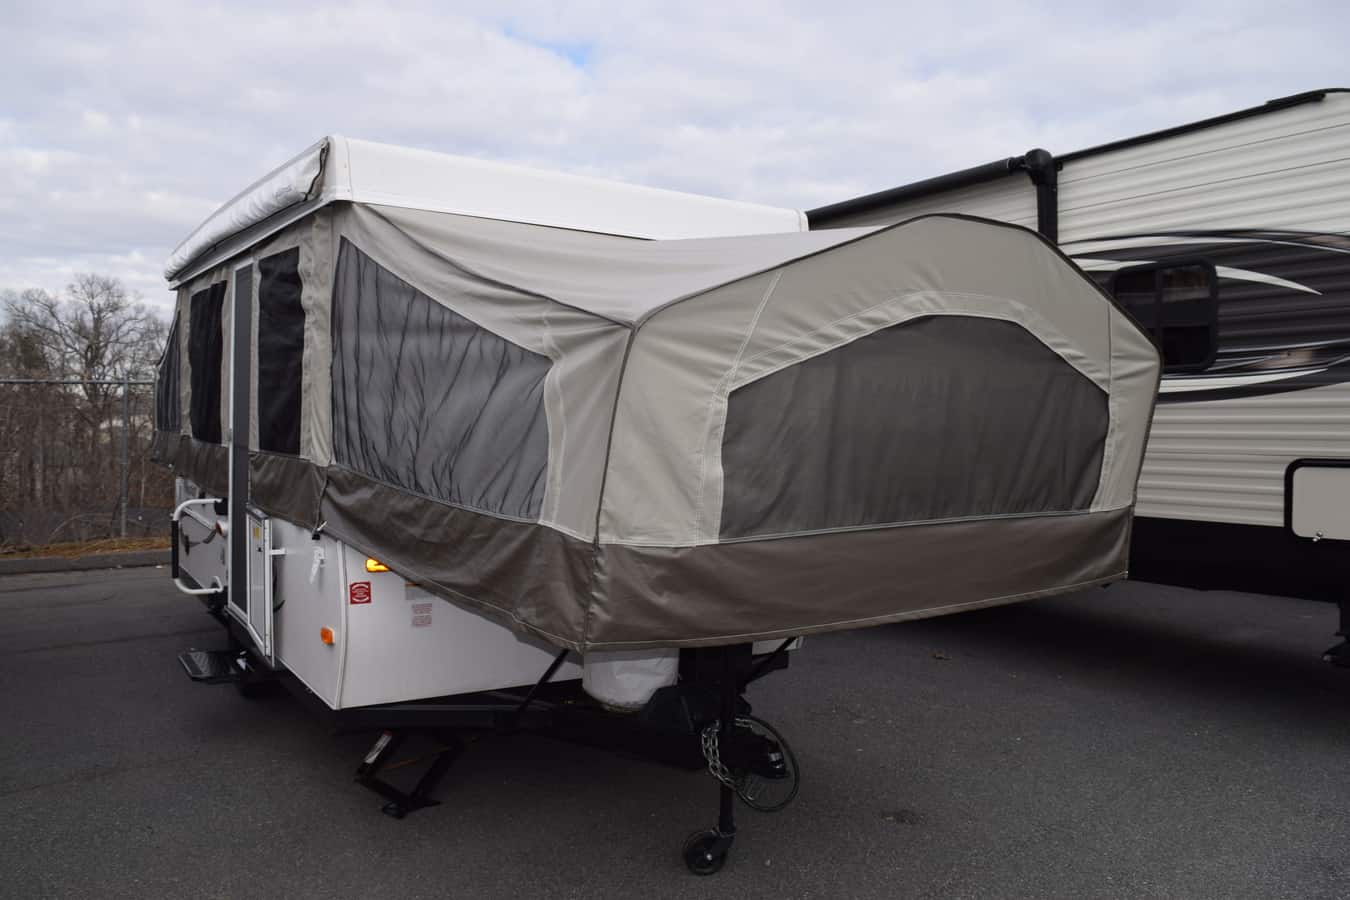 USED 2016 Forest river Flagstaff 227